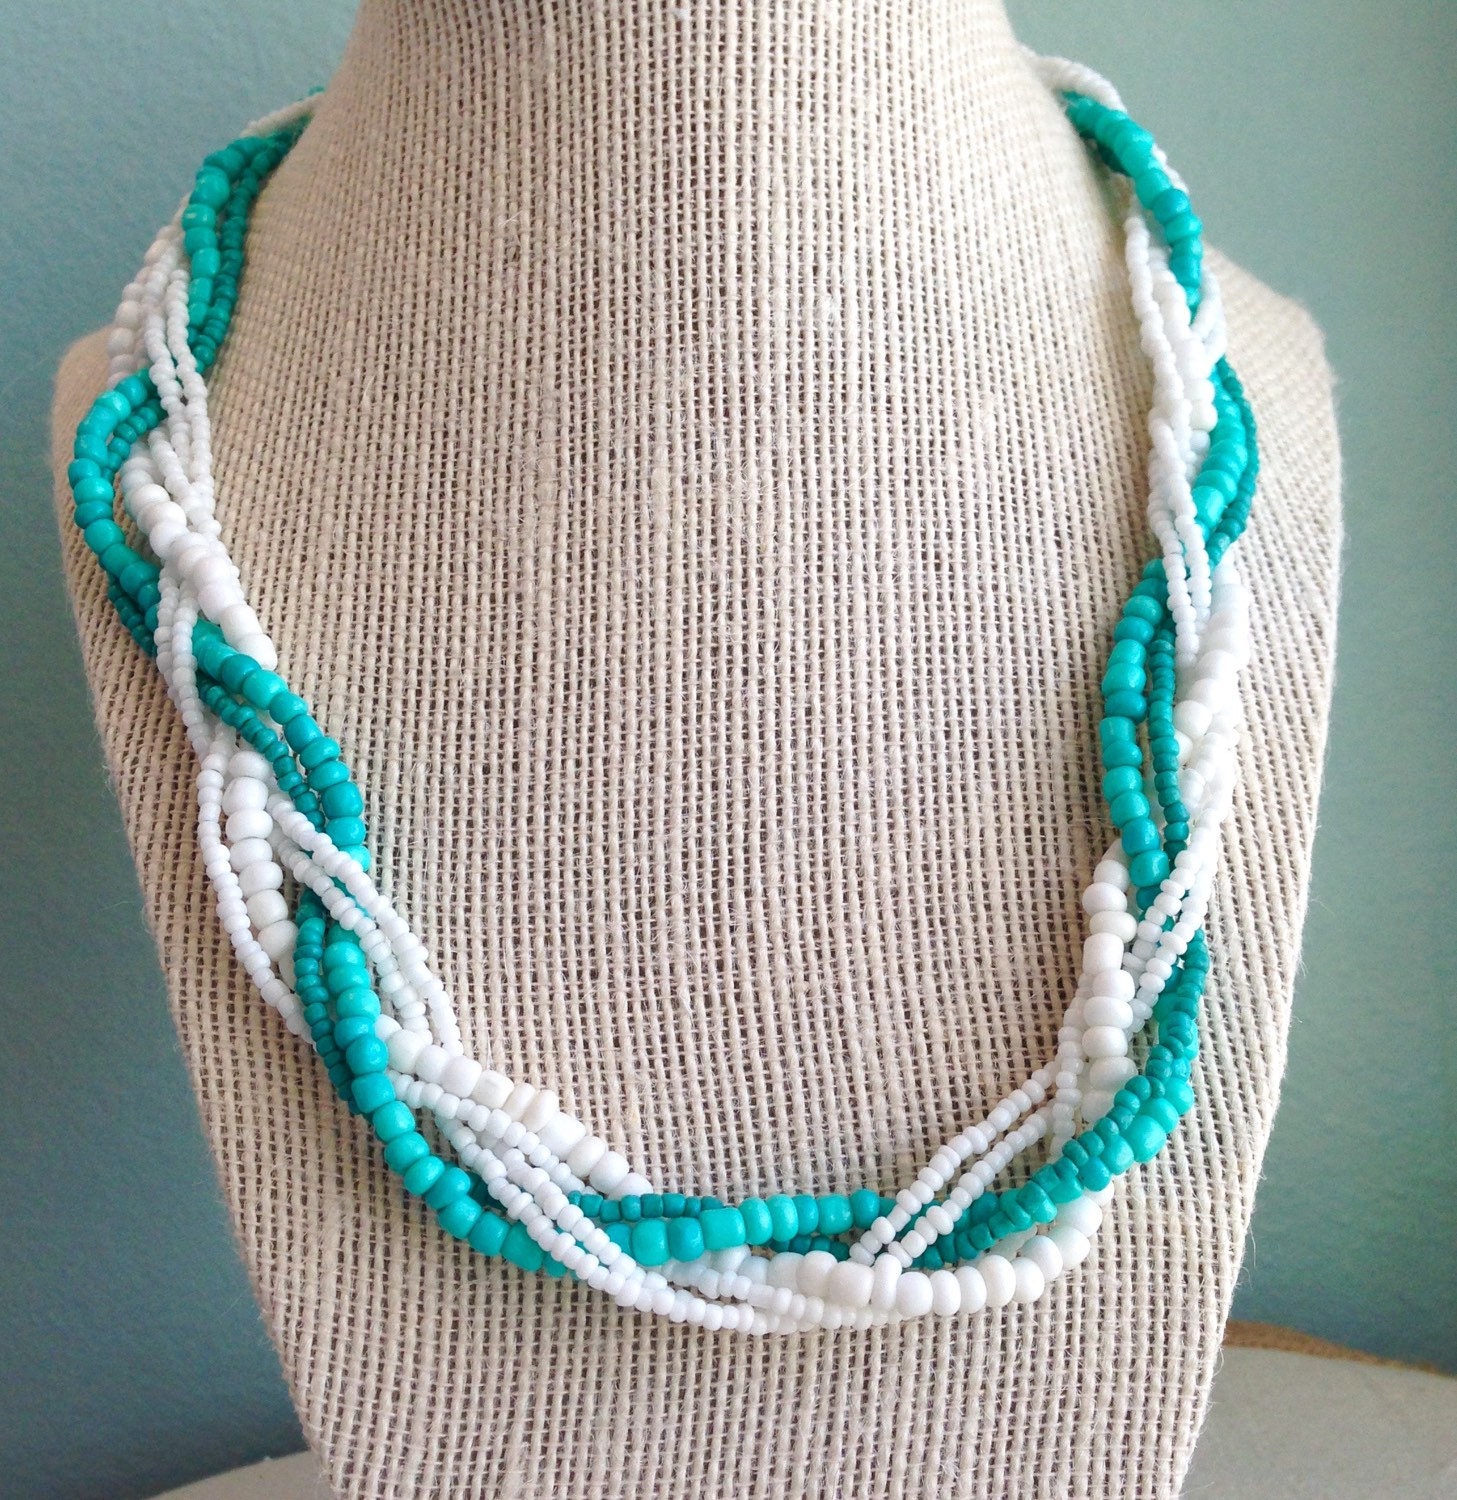 Turquoise and White Seed Bead Necklace Braided Necklace